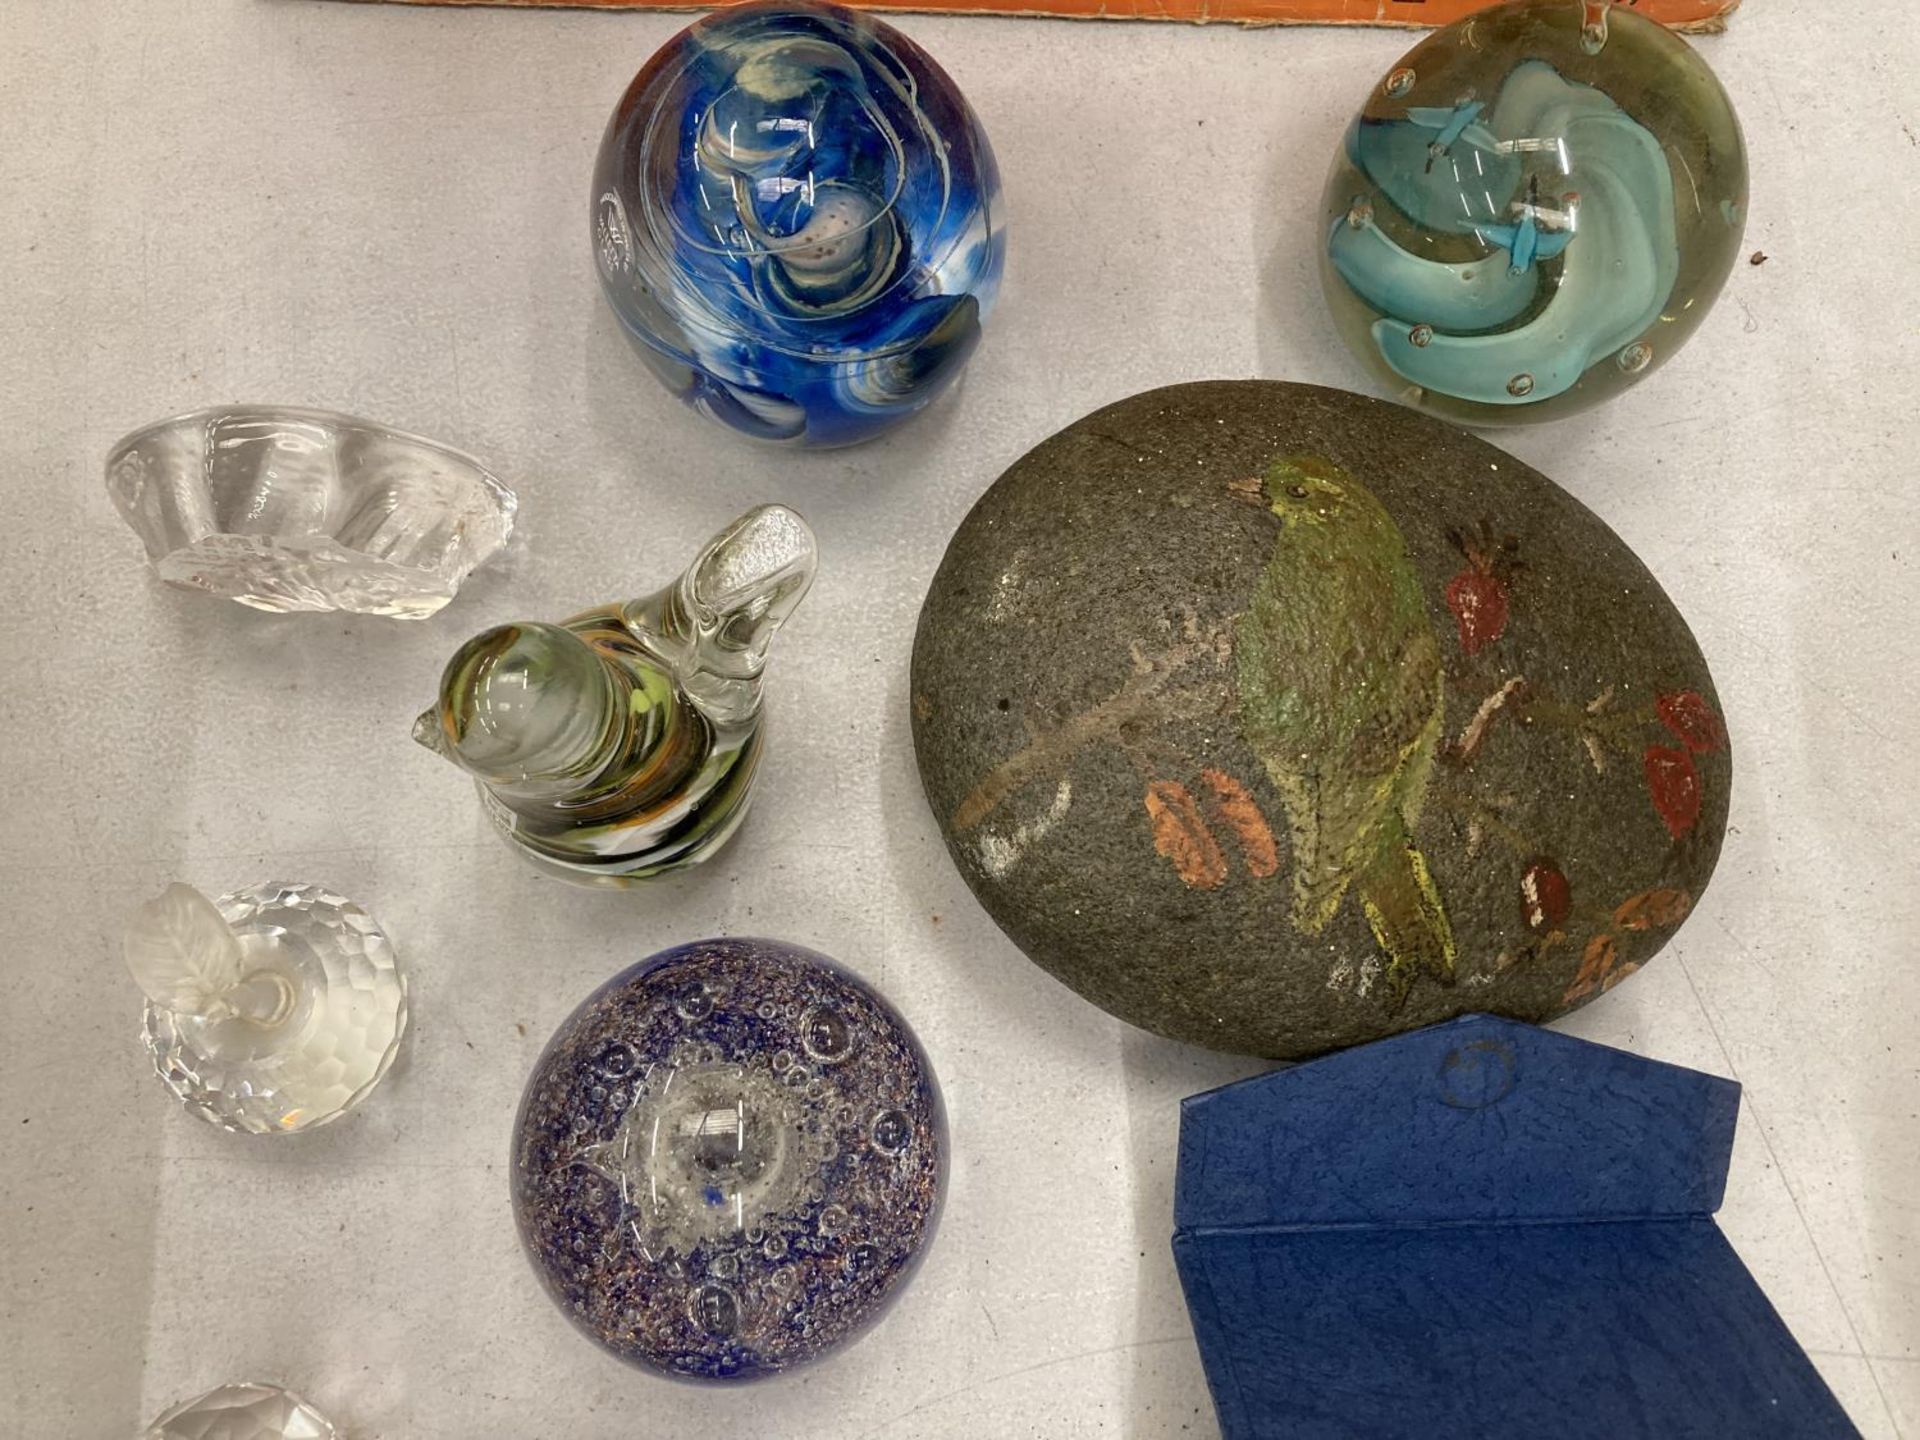 A LARGE COLLECTION OF GLASSWARE PAPERWEIGHTS TO INCLUDE A MDINA BIRD, ETC - 20 IN TOTAL - Image 3 of 4